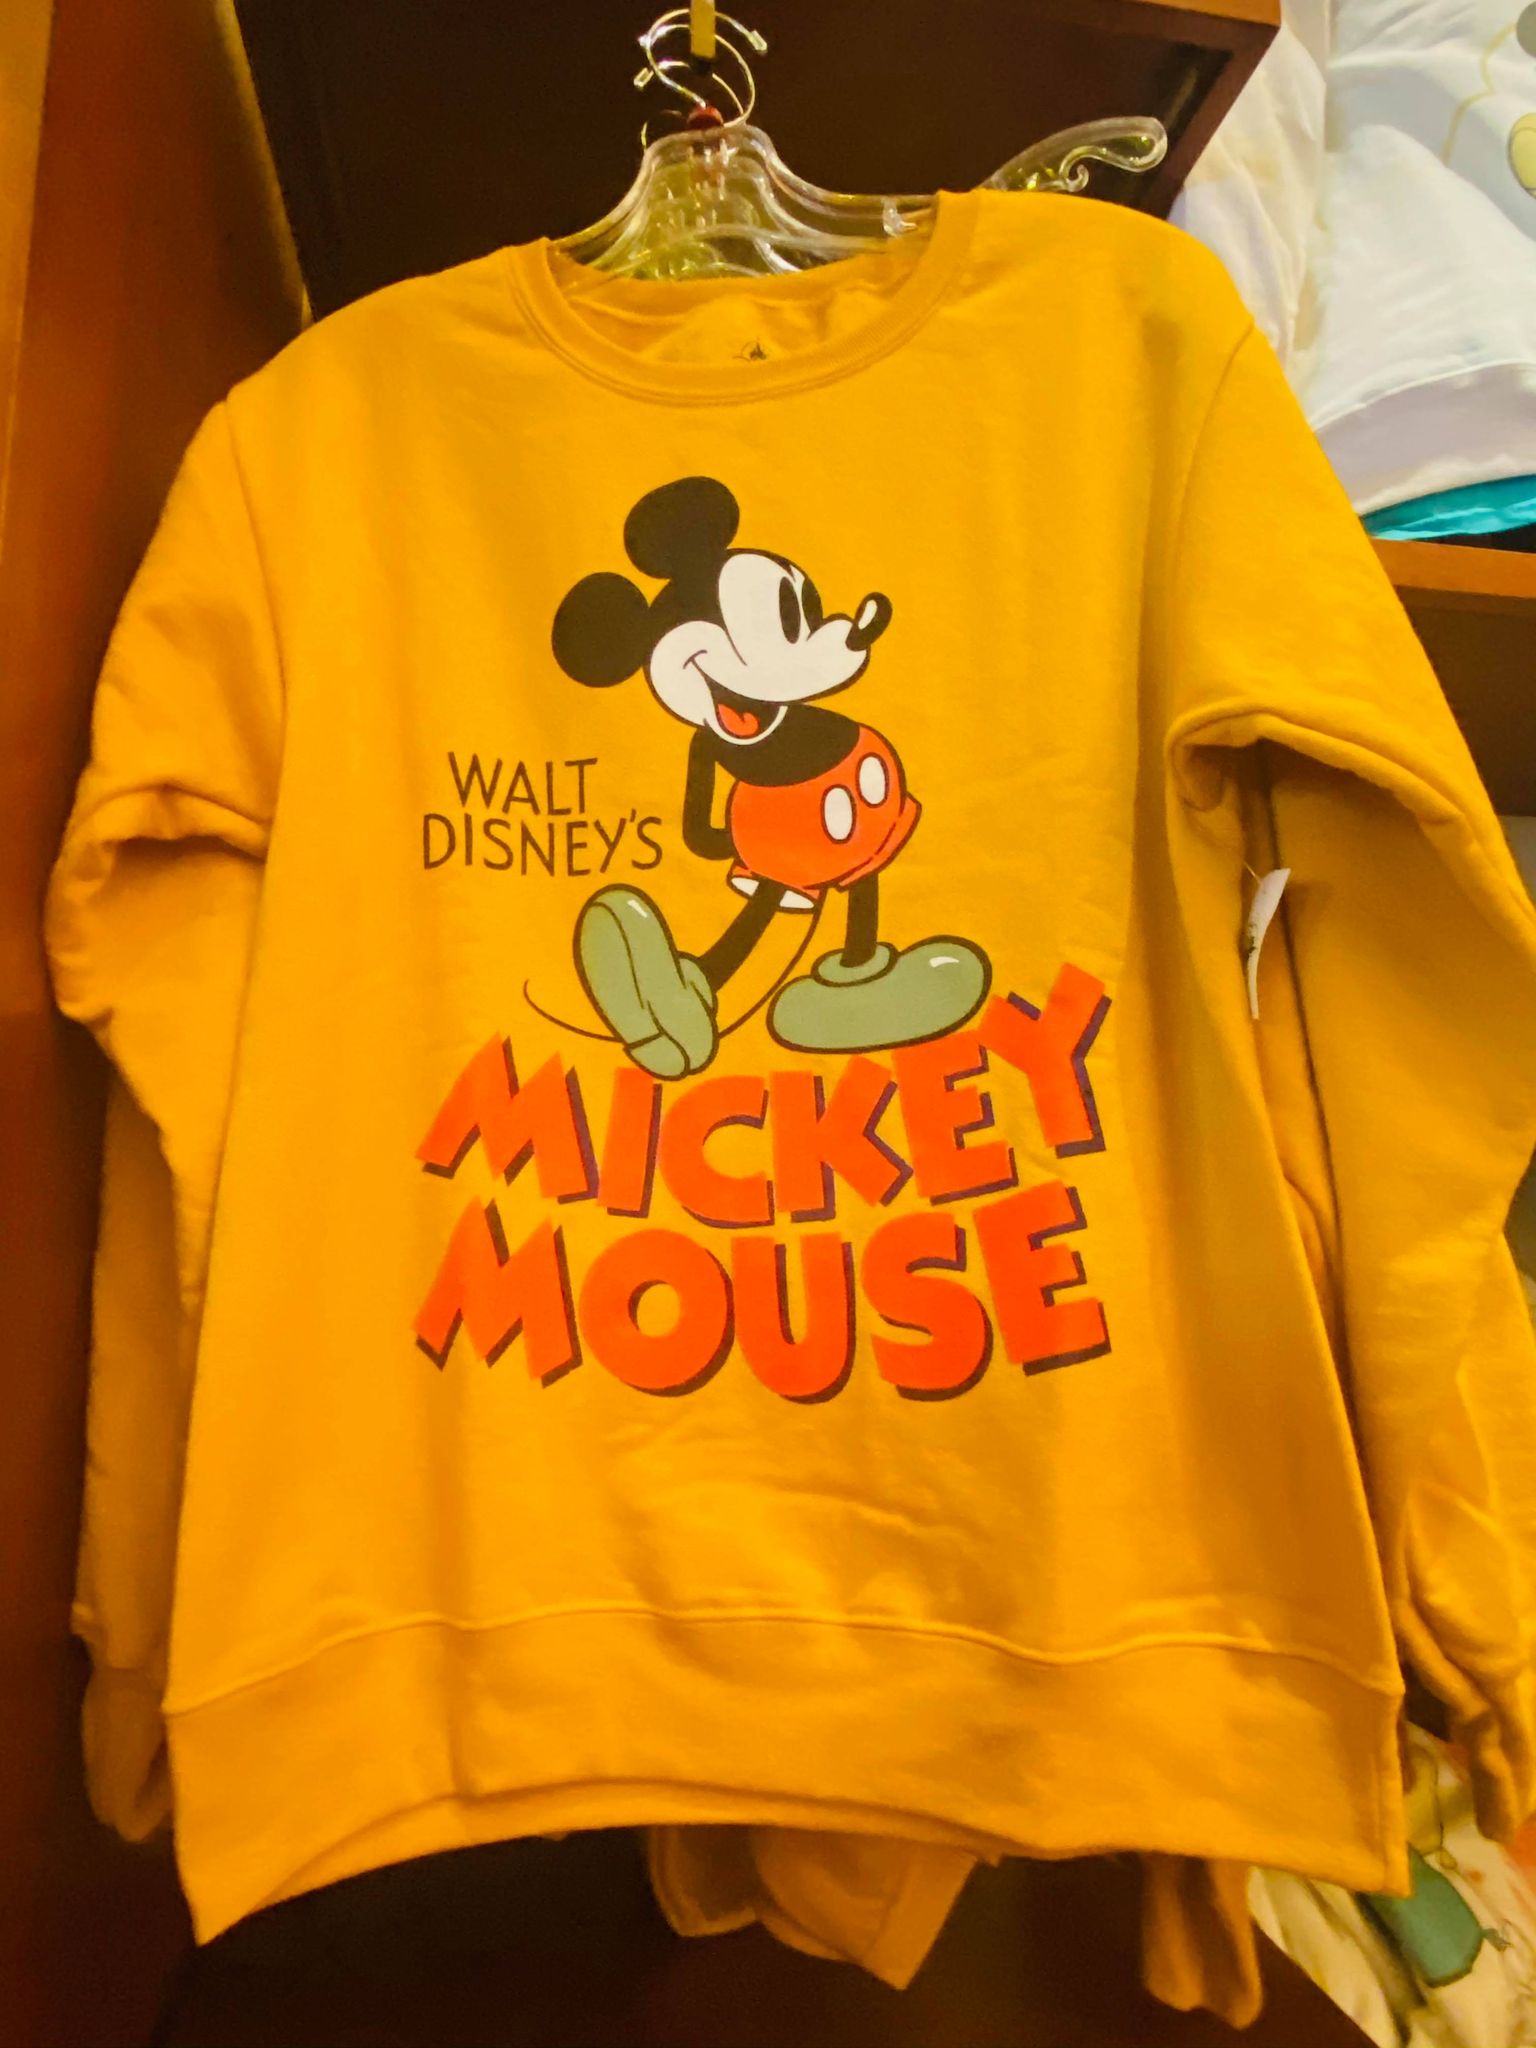 These Vintage Disney Crew Neck Sweatshirts are a Must Have